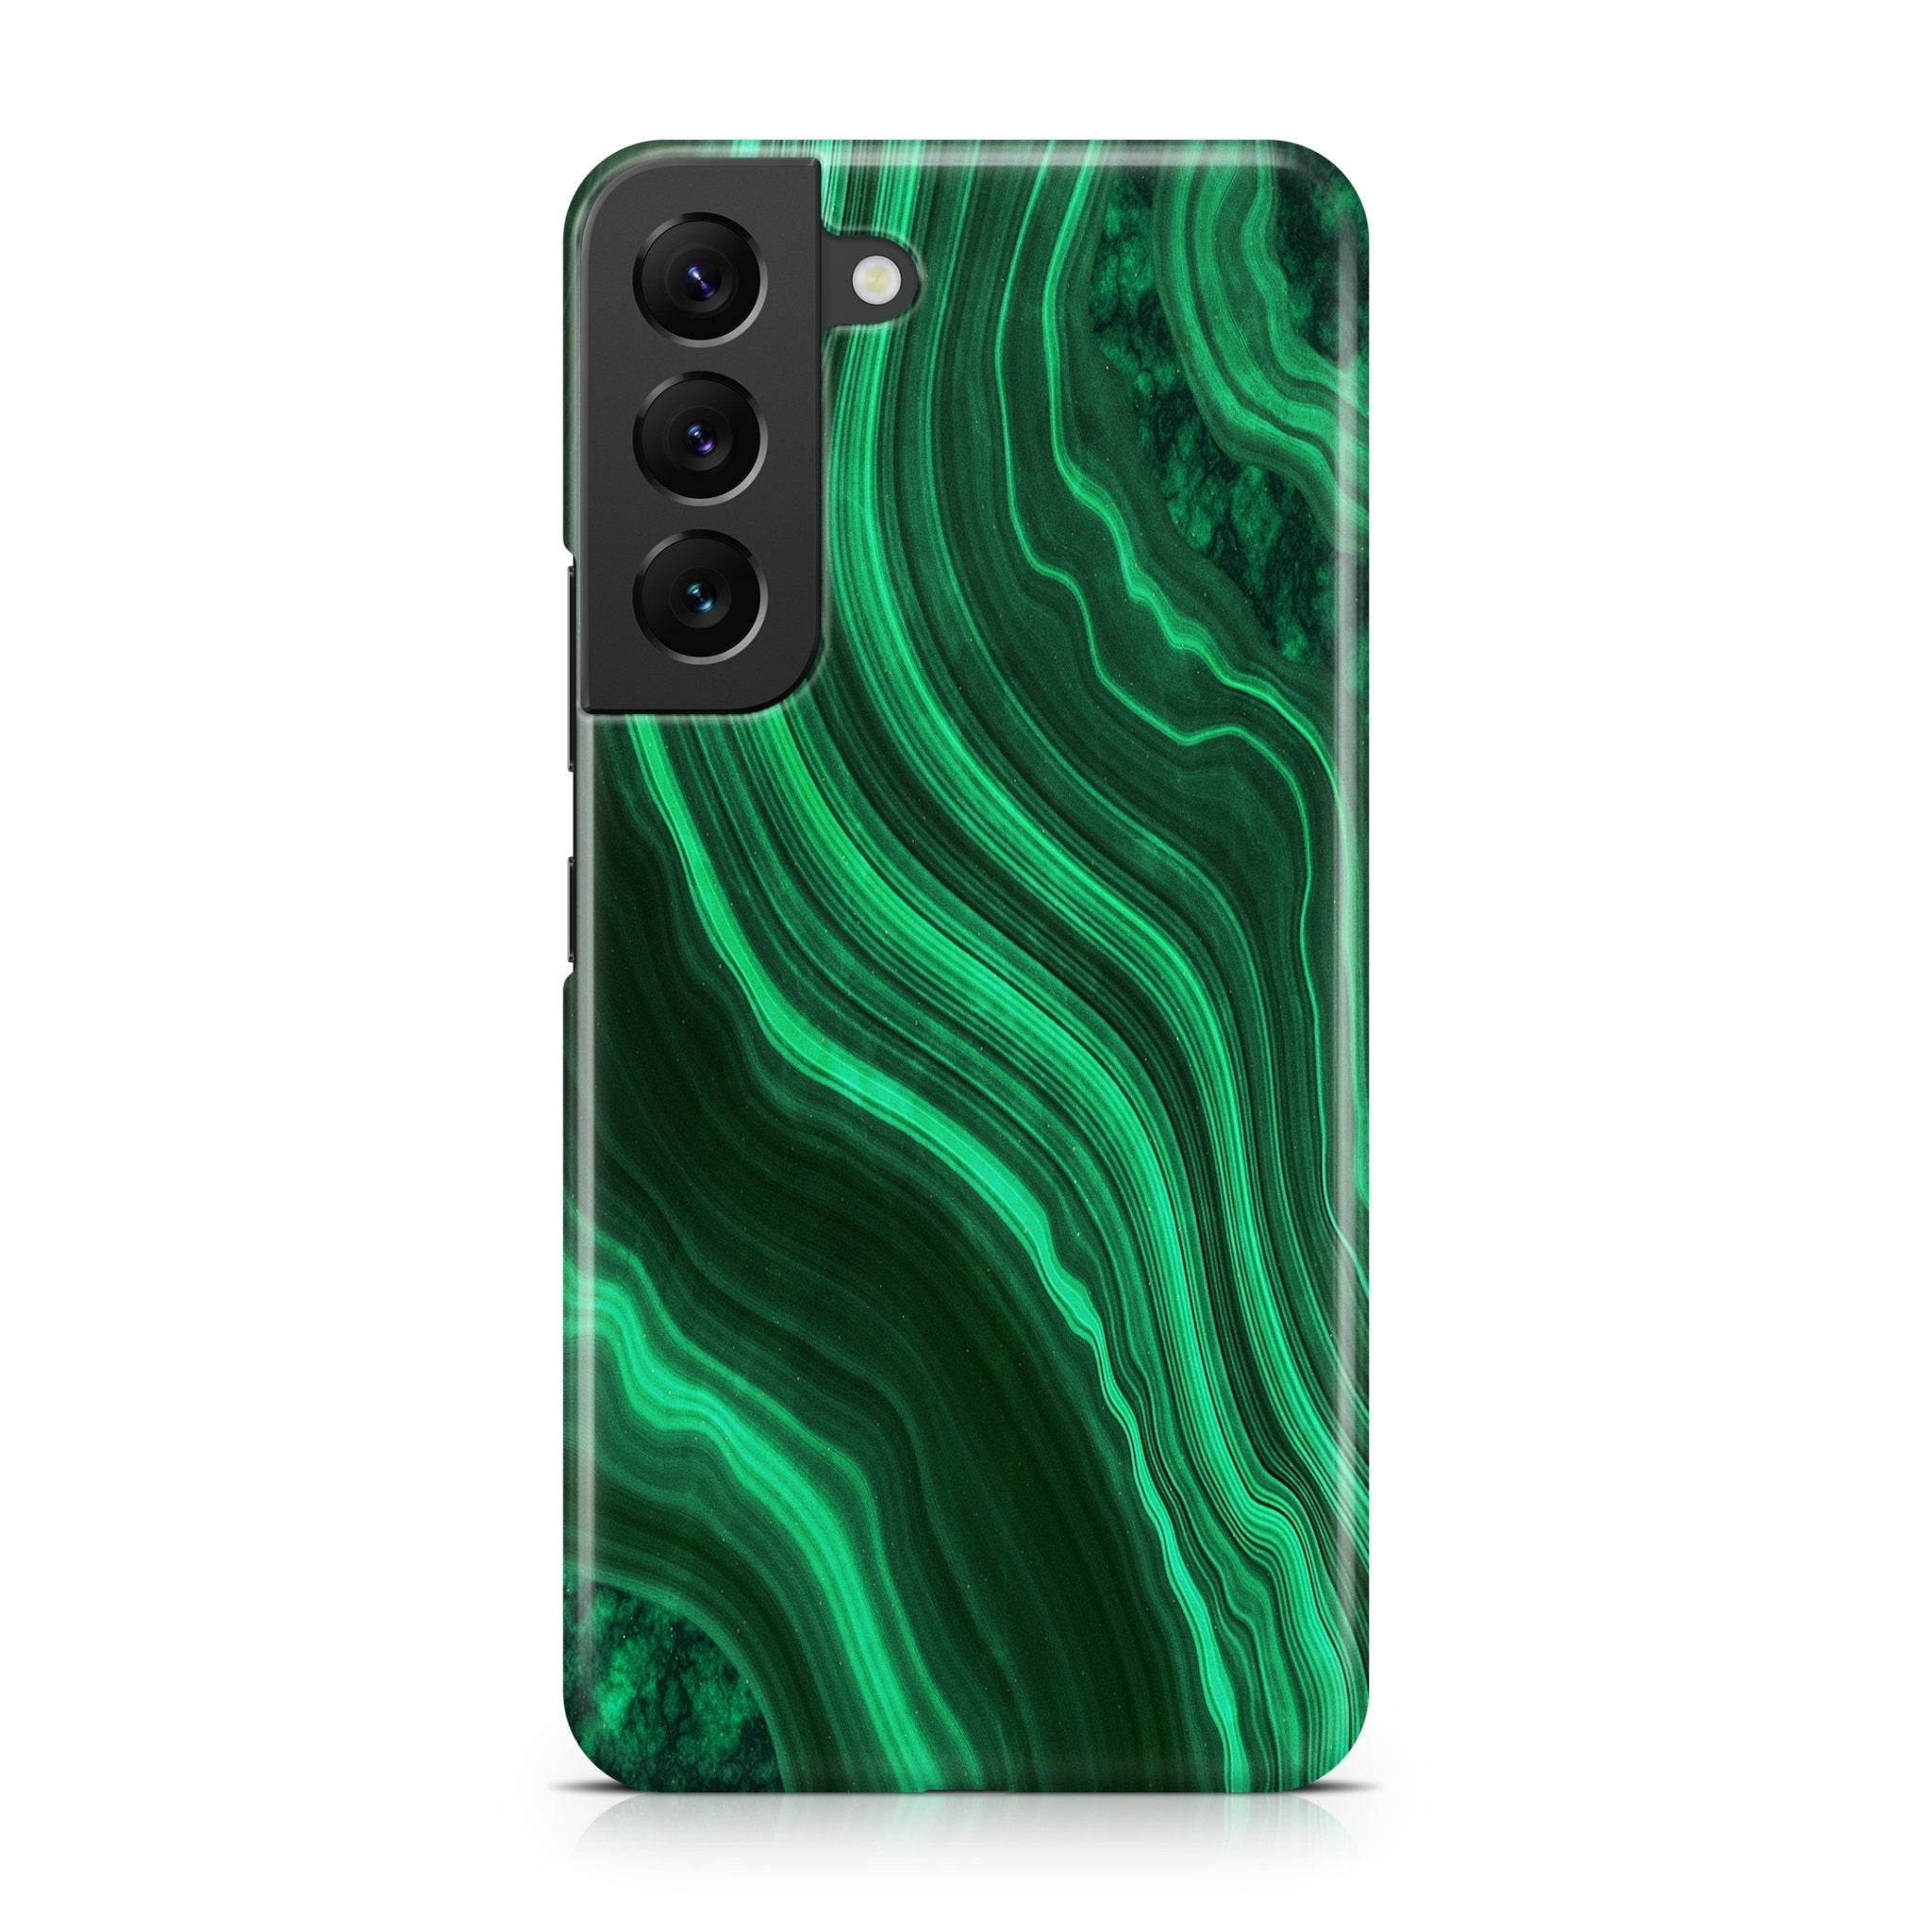 Malachite II - Samsung phone case designs by CaseSwagger